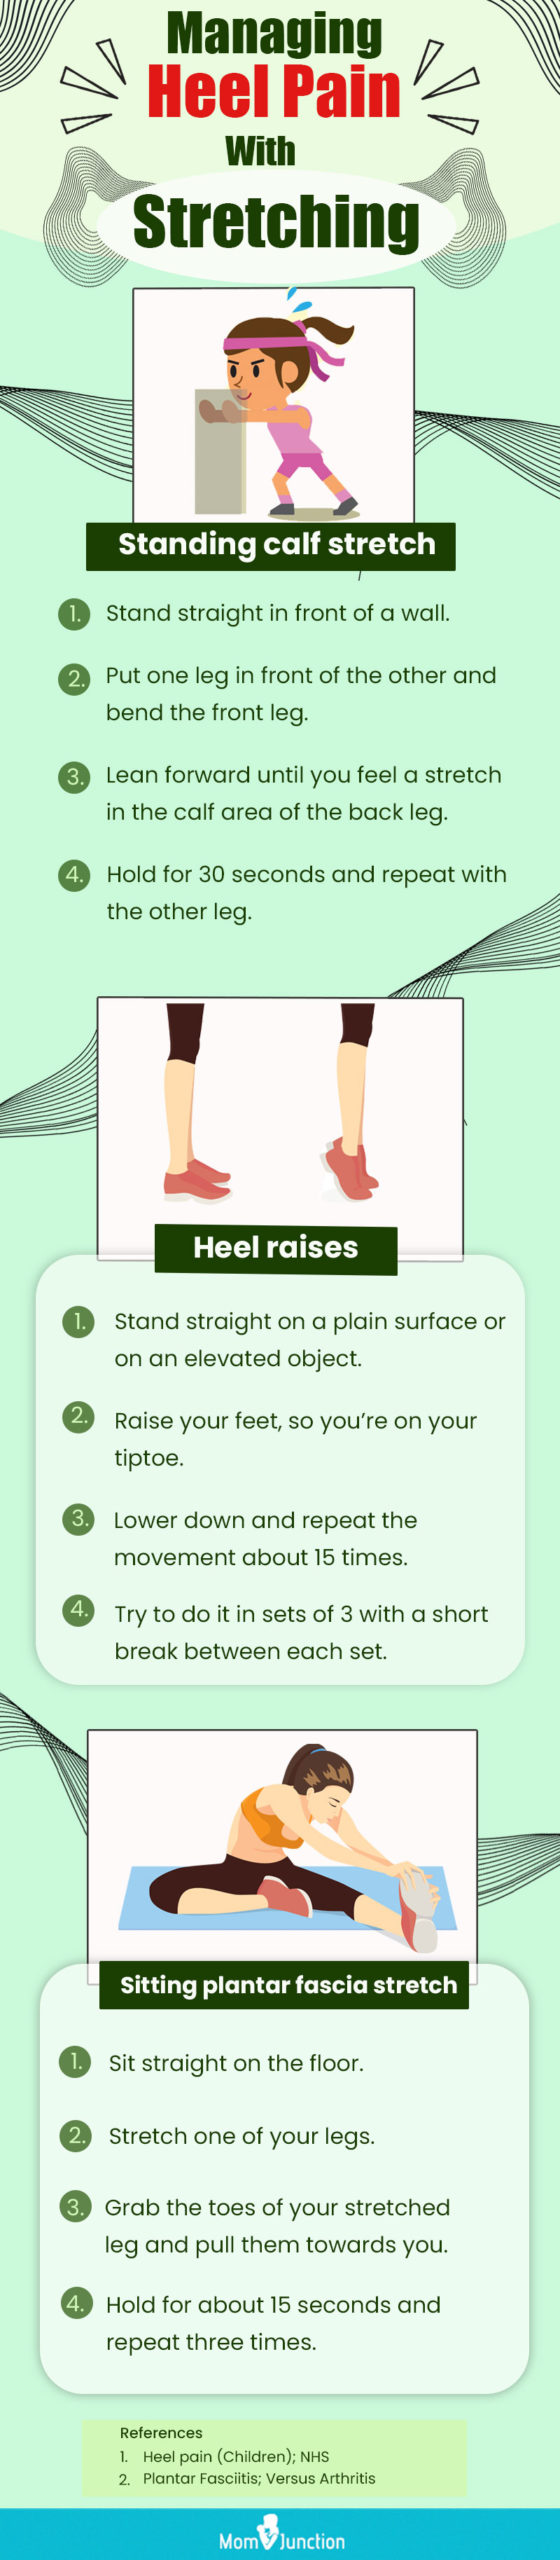 stretching exercises for child heel pain (infographic)